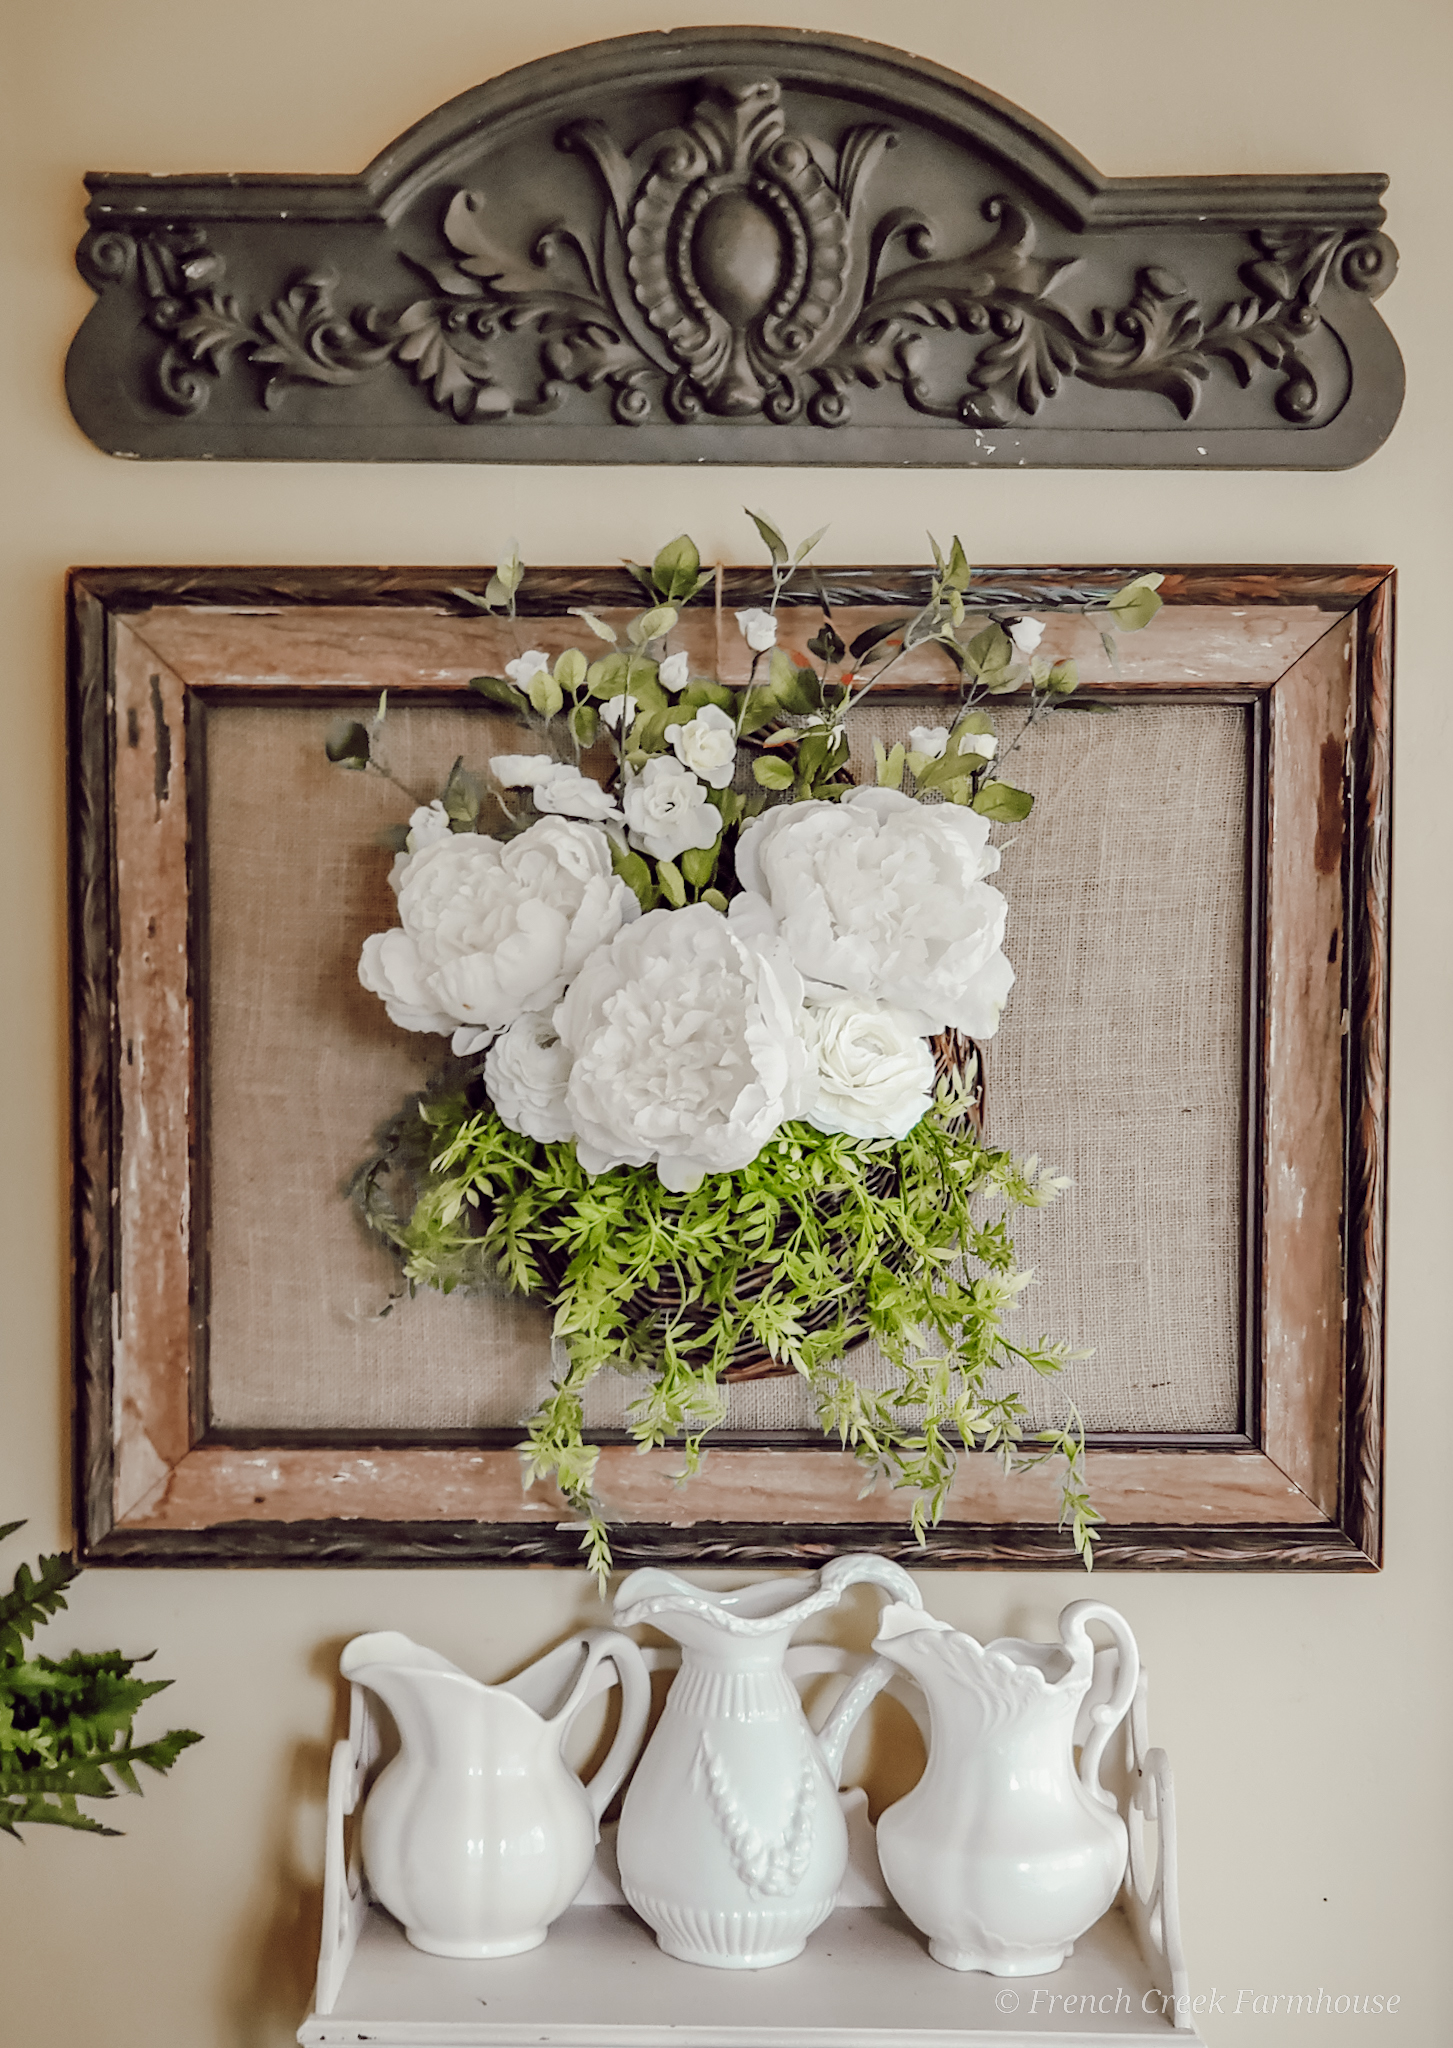 An old picture frame is a beautiful backdrop for floral arrangements